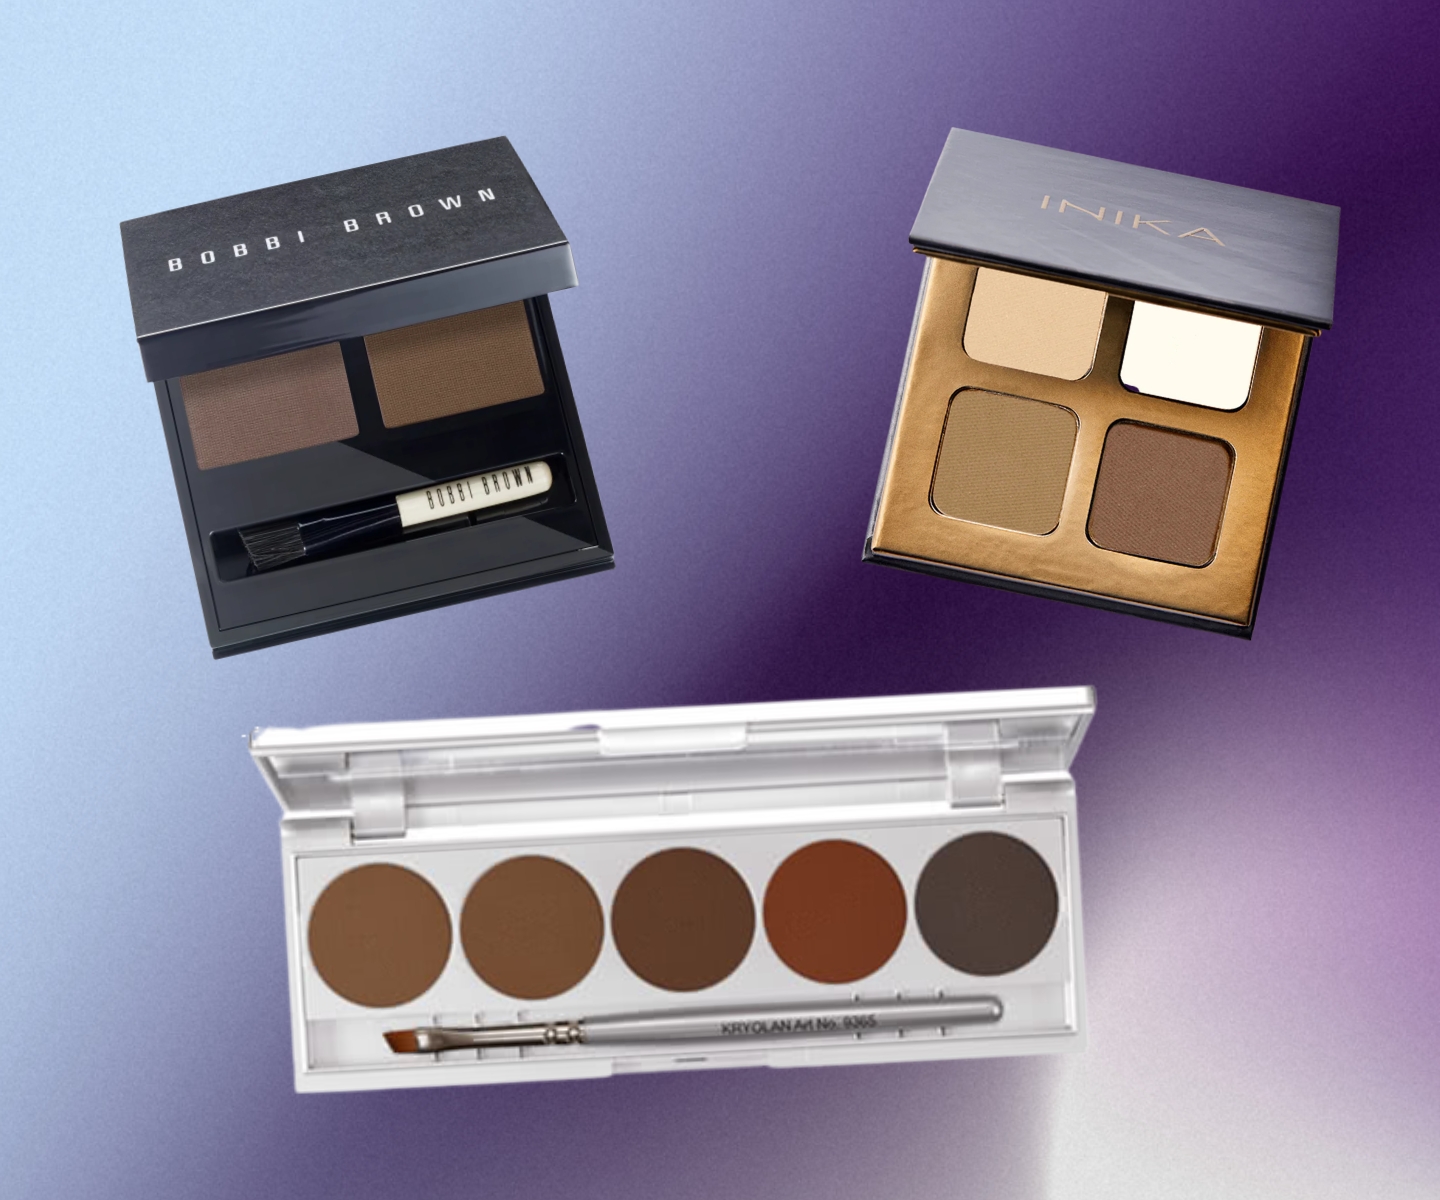 Best Eyebrow Kits for Beginners